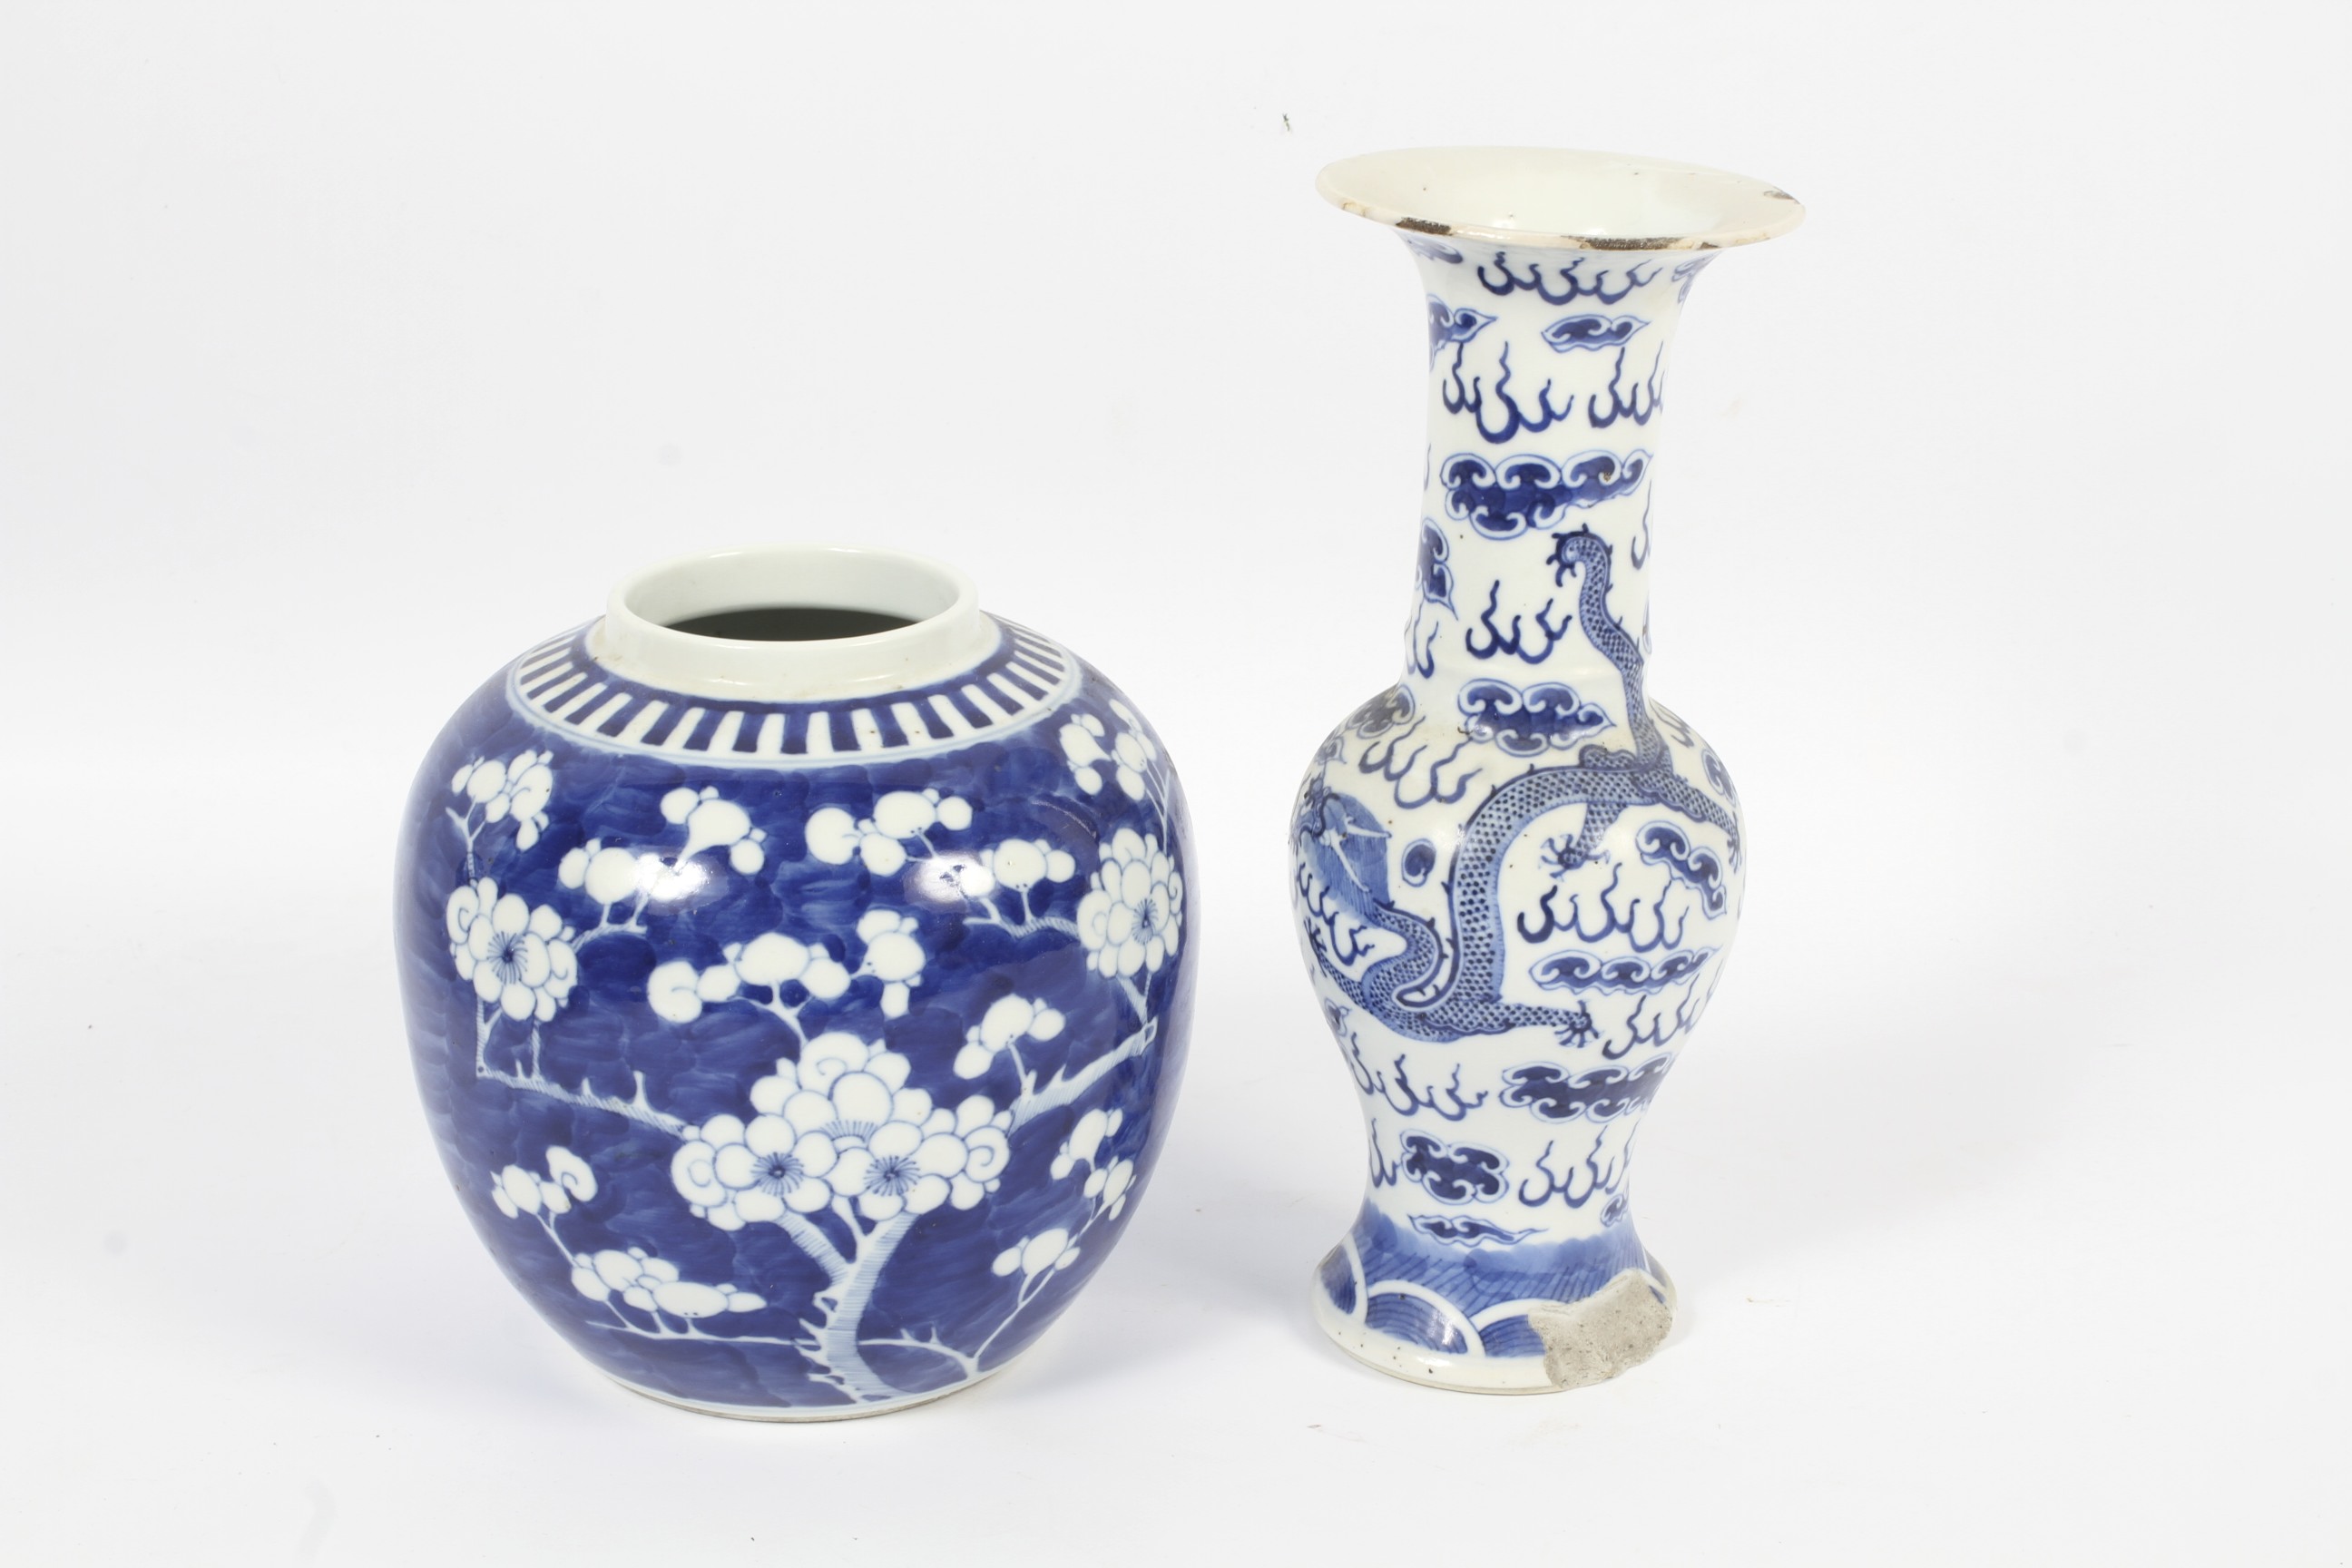 A Chinese porcelain blue and white dragon vase and a ginger jar.